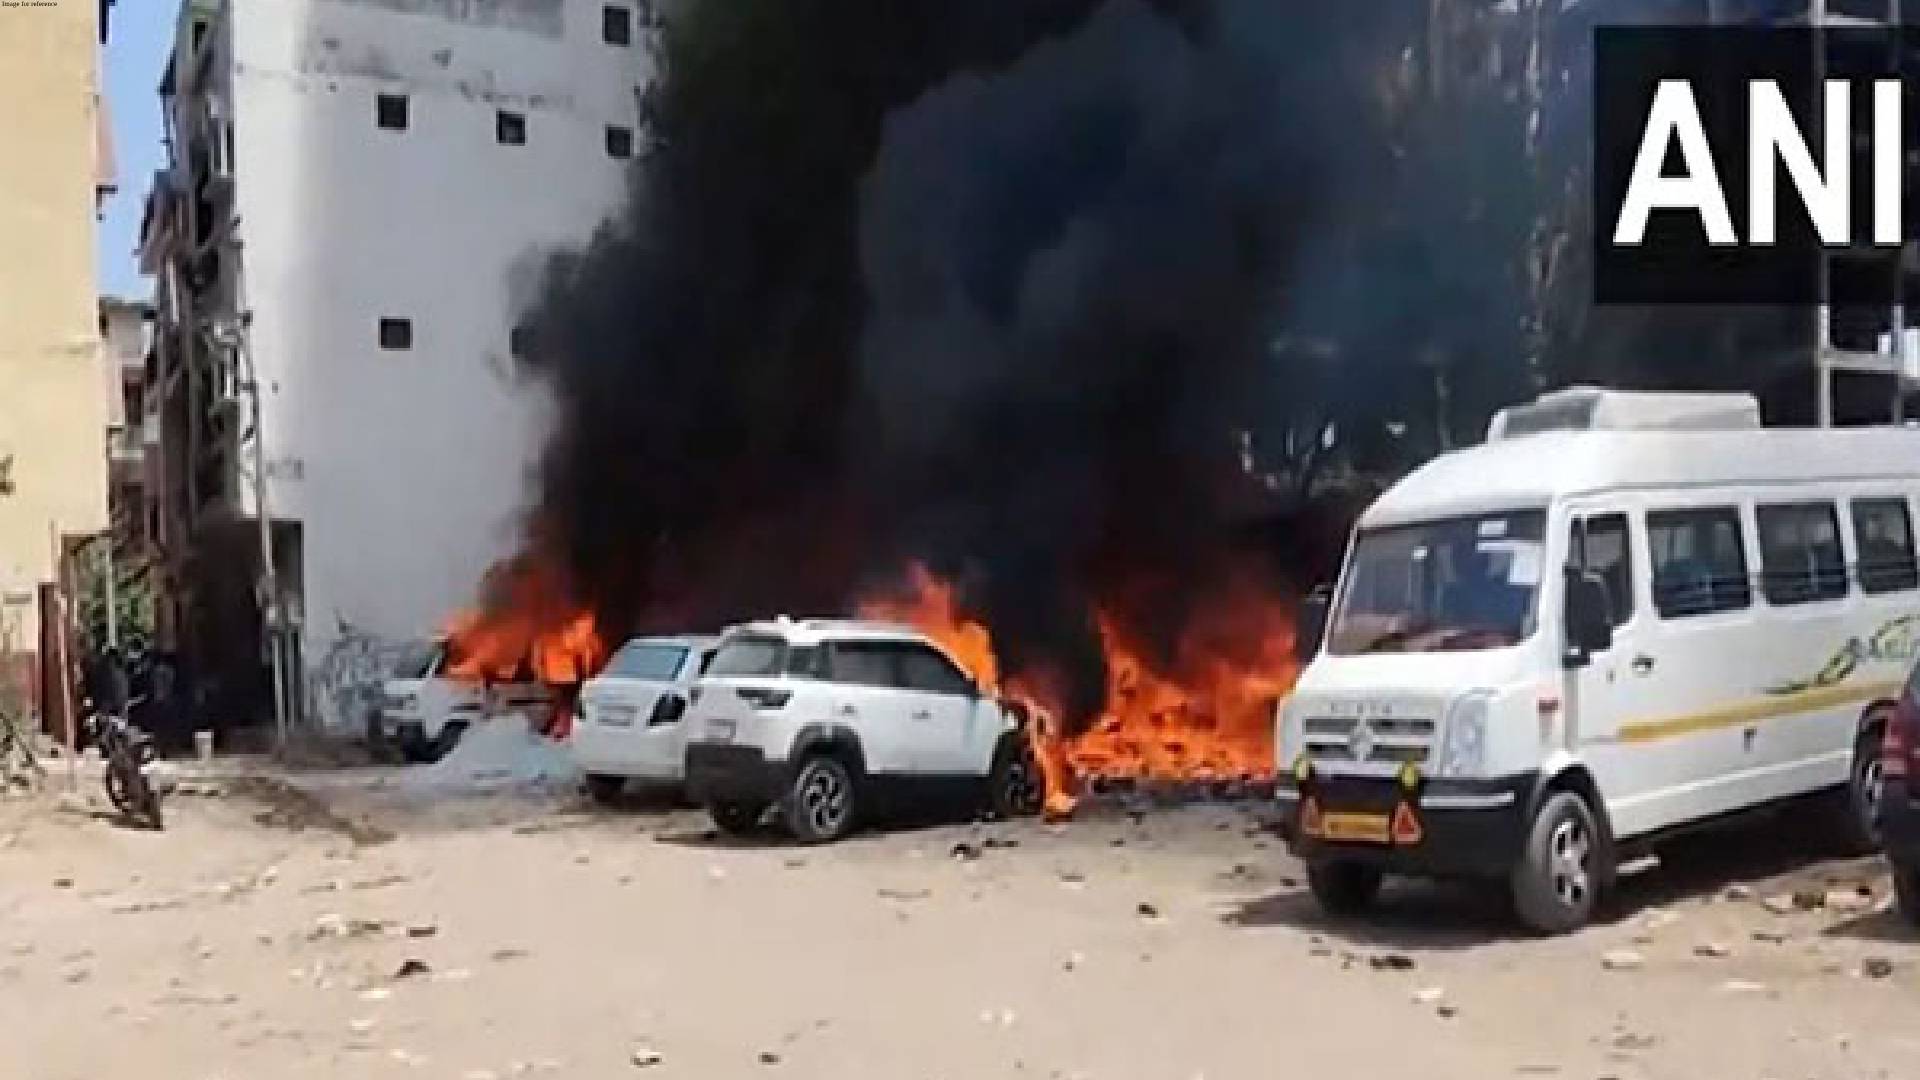 Haryana: Fire breaks out in four parked vehicles in Gurugram